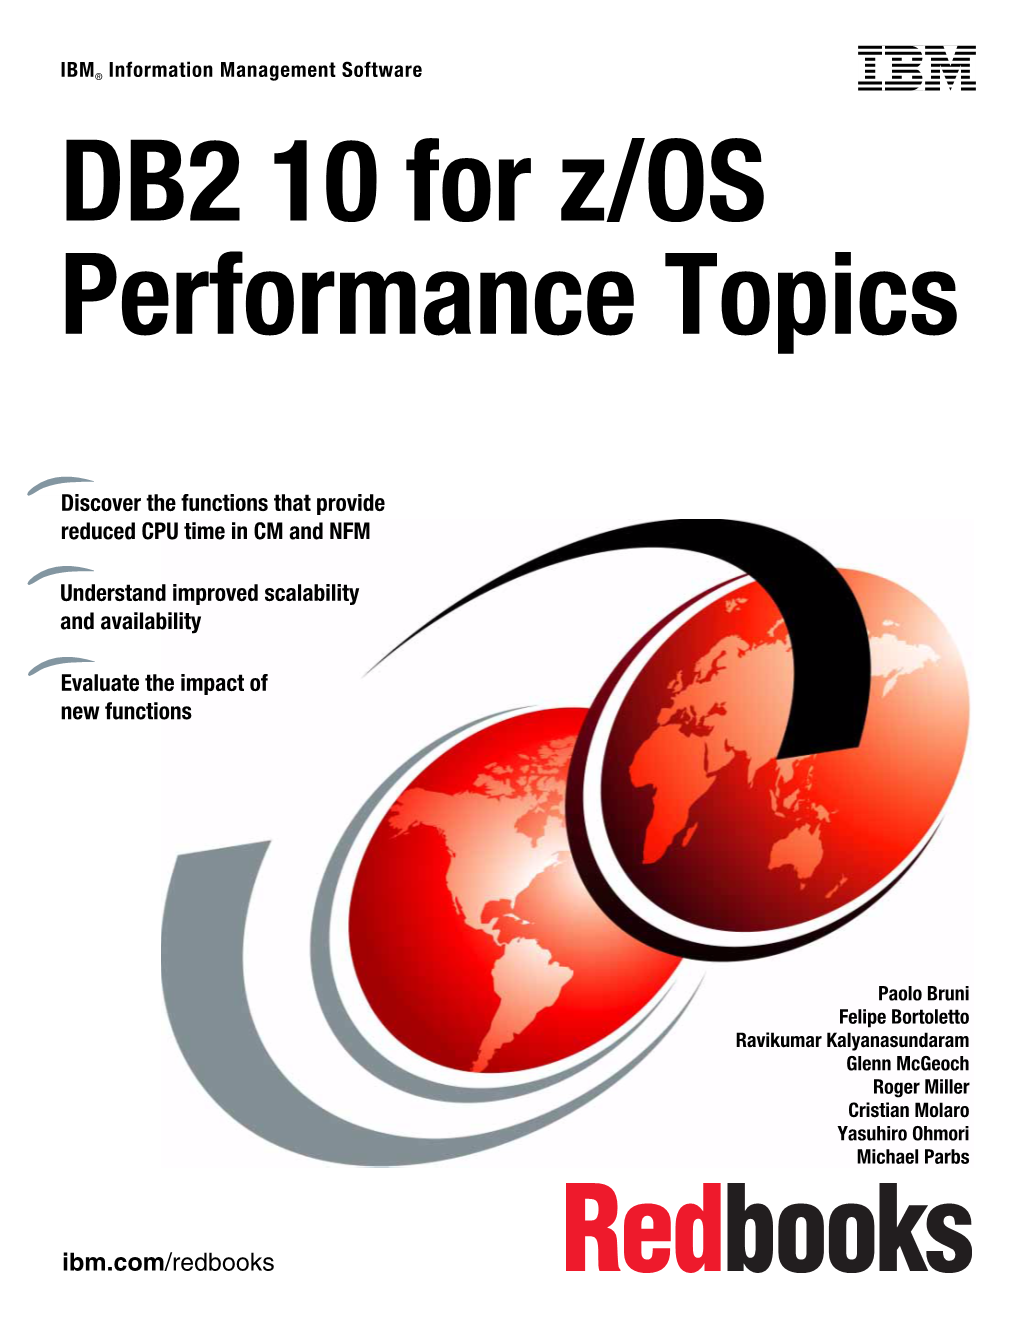 DB2 10 for Z/OS Performance Topics